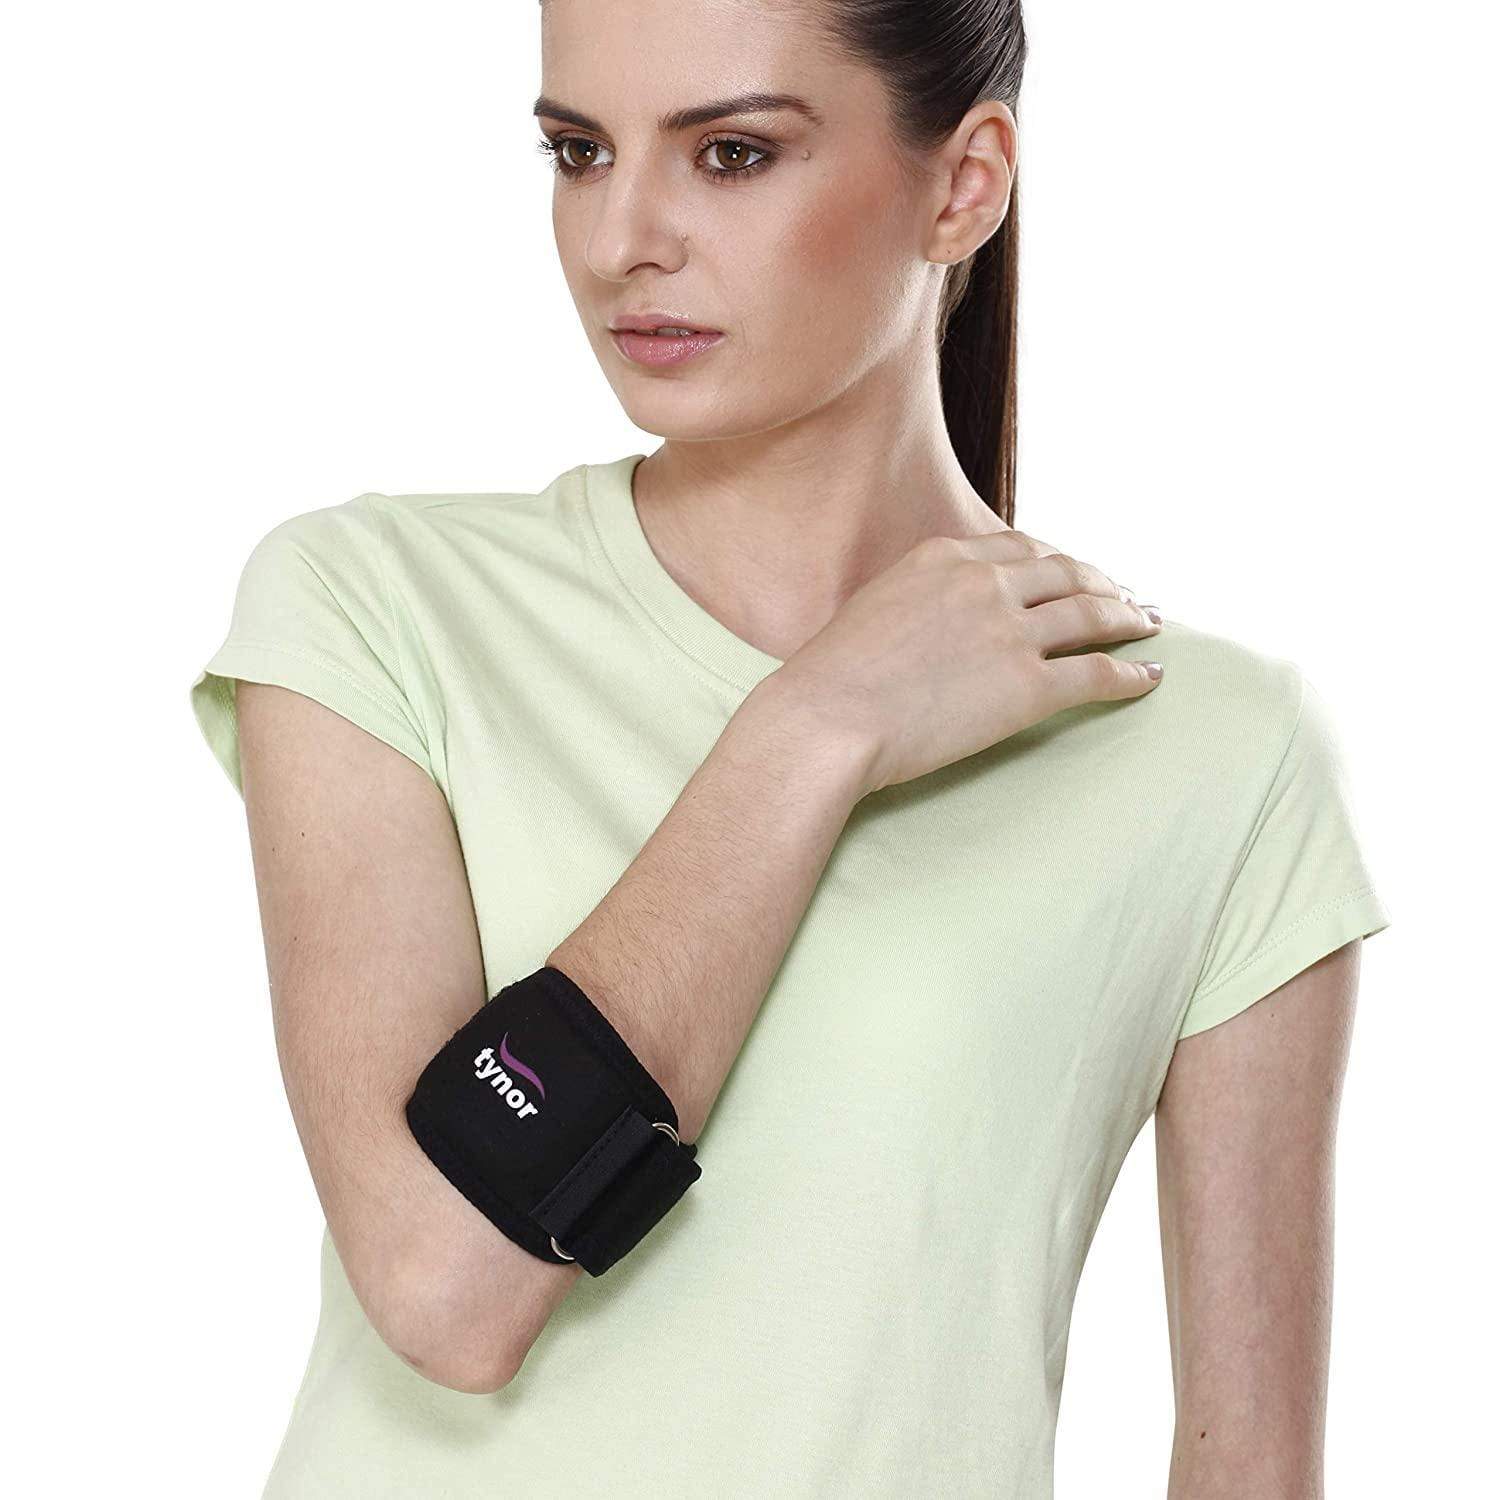 Tynor Tennis Elbow Support E-10-Health & Personal Care-dealsplant